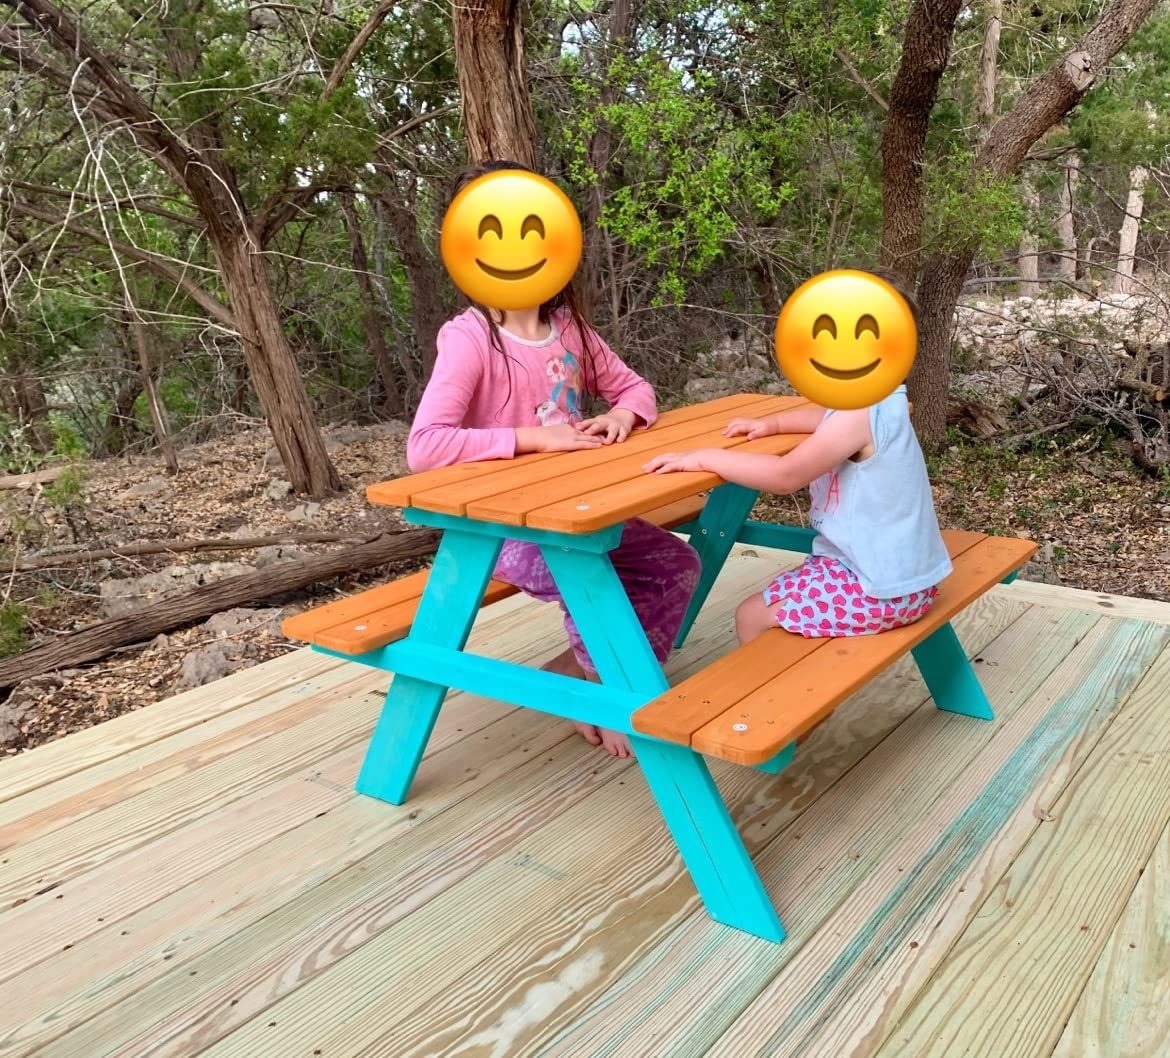 Two children sitting at a brightly painted turquoise picnic table in a natural setting